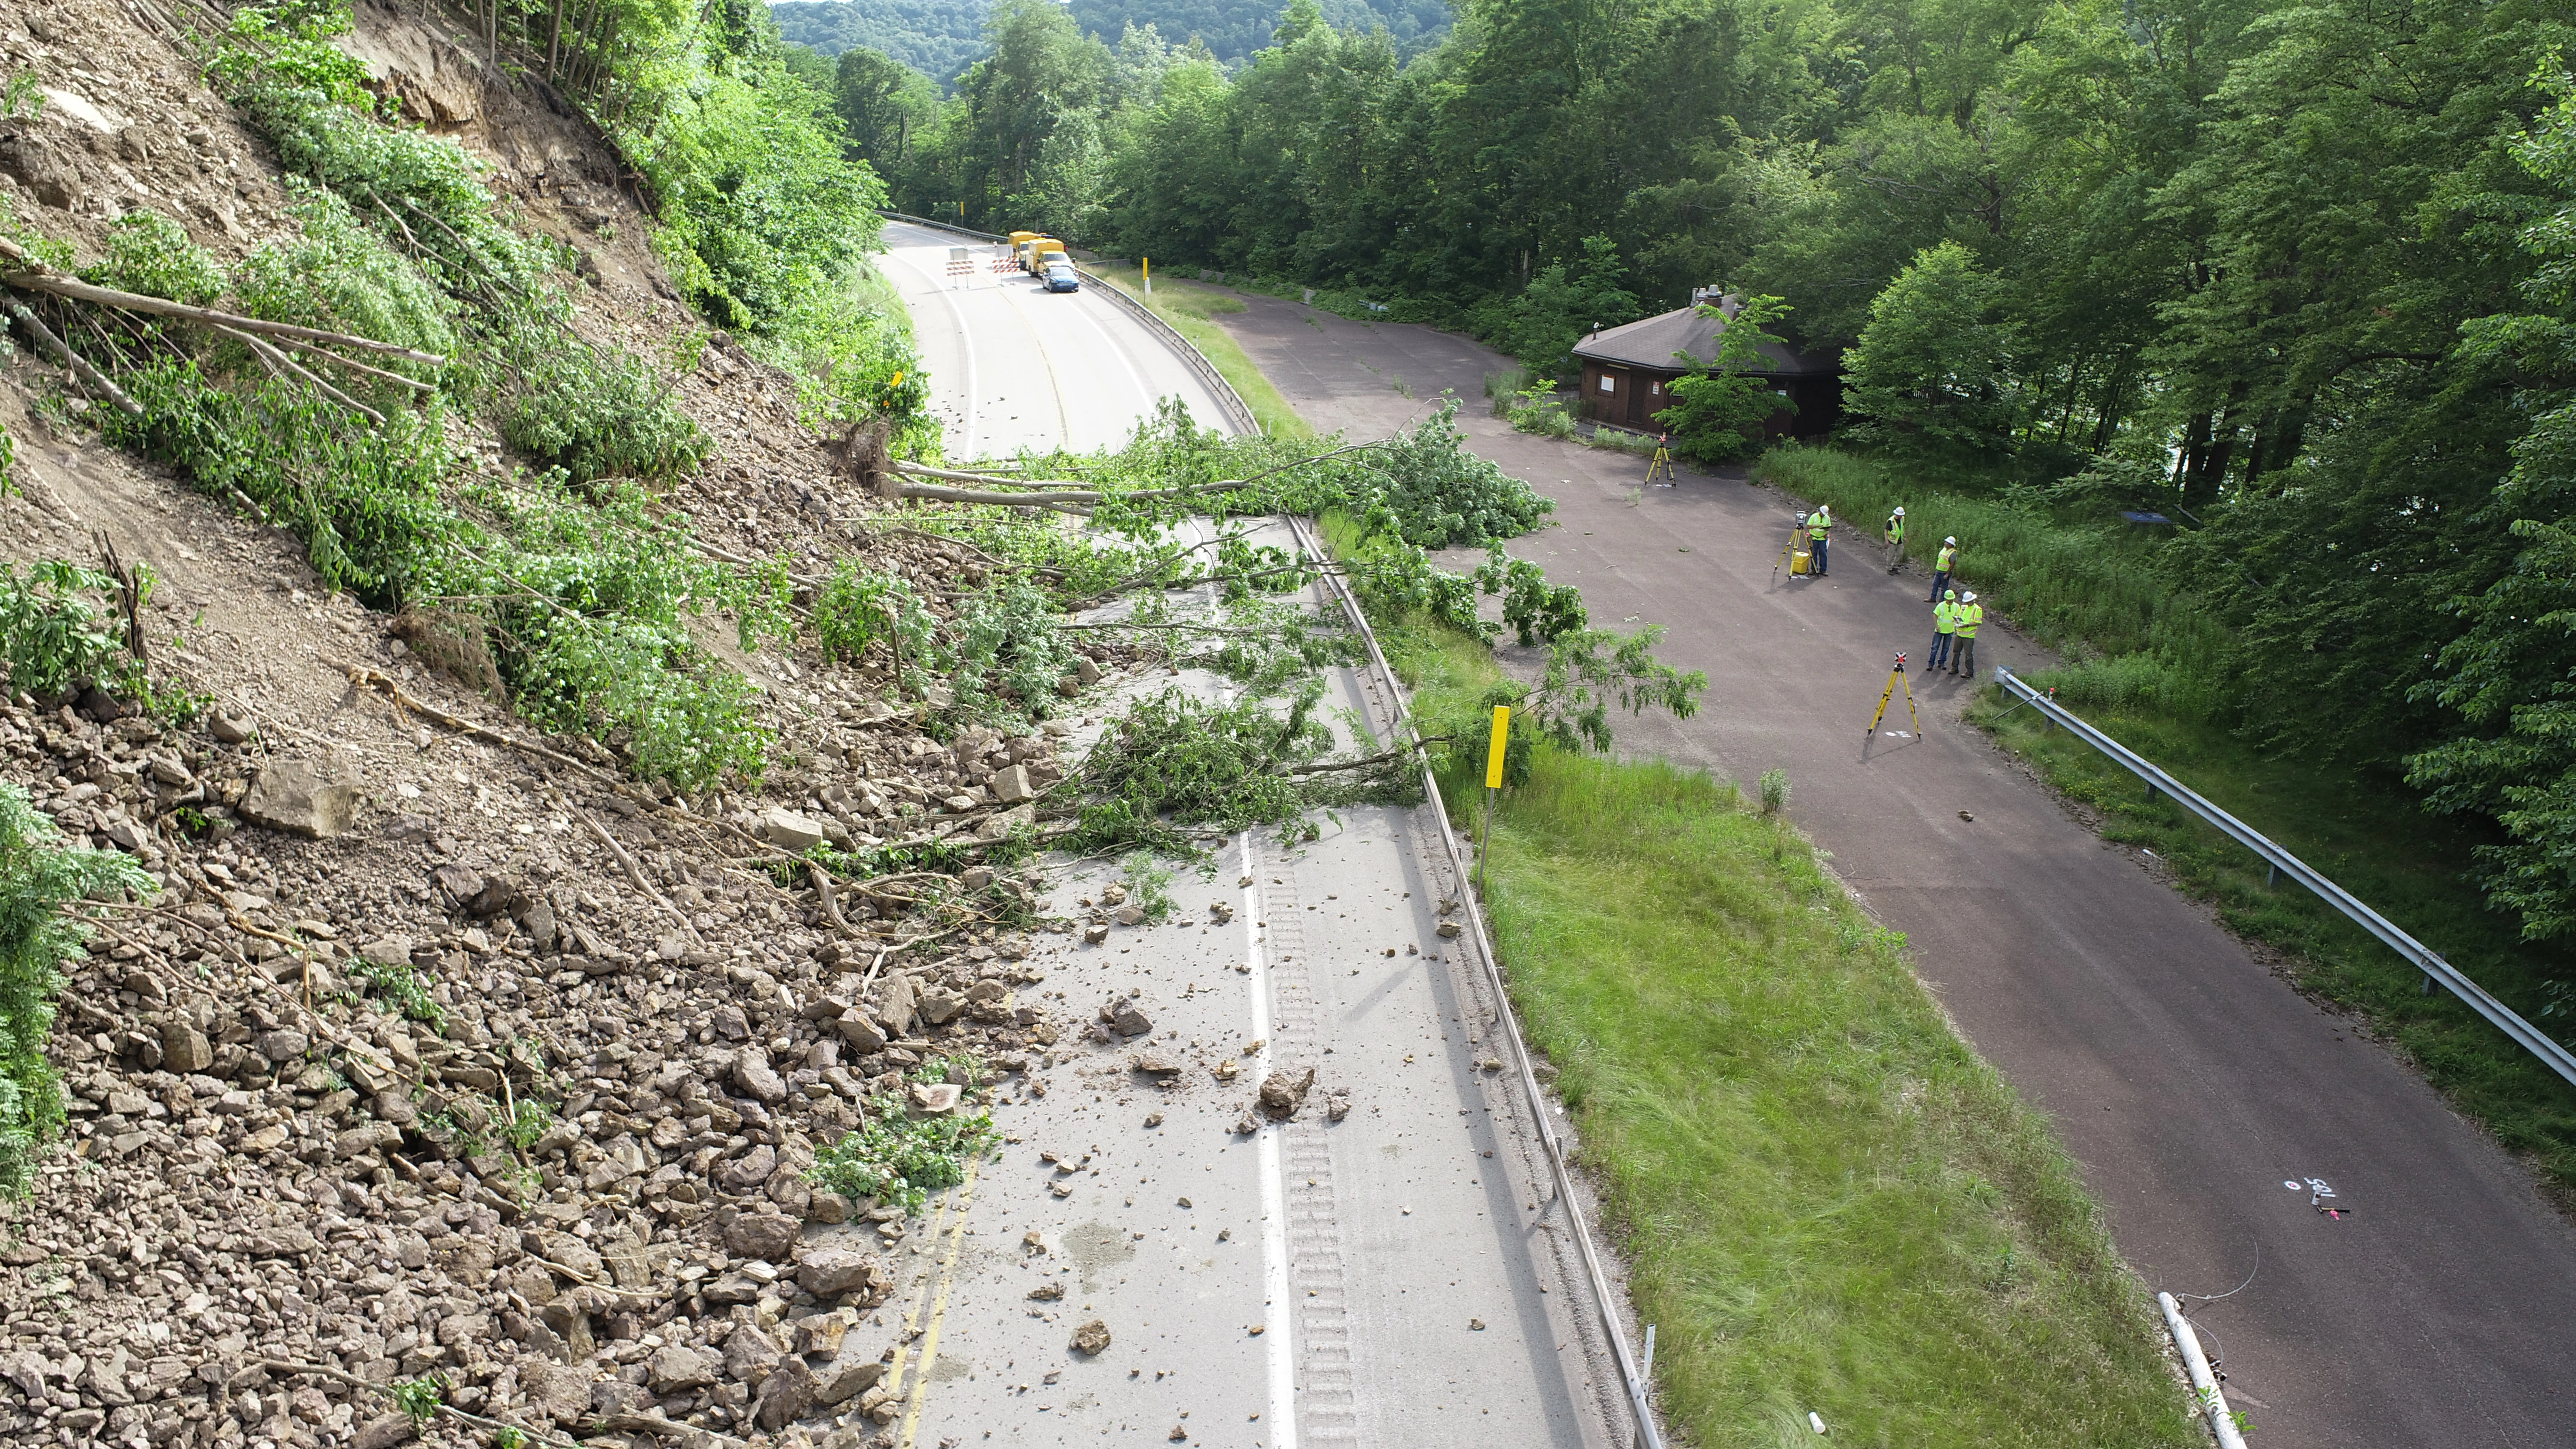 An aerial image taken from a drone shows construction workers assessing a roadway covered with fallen trees and other debris due to a landslide.